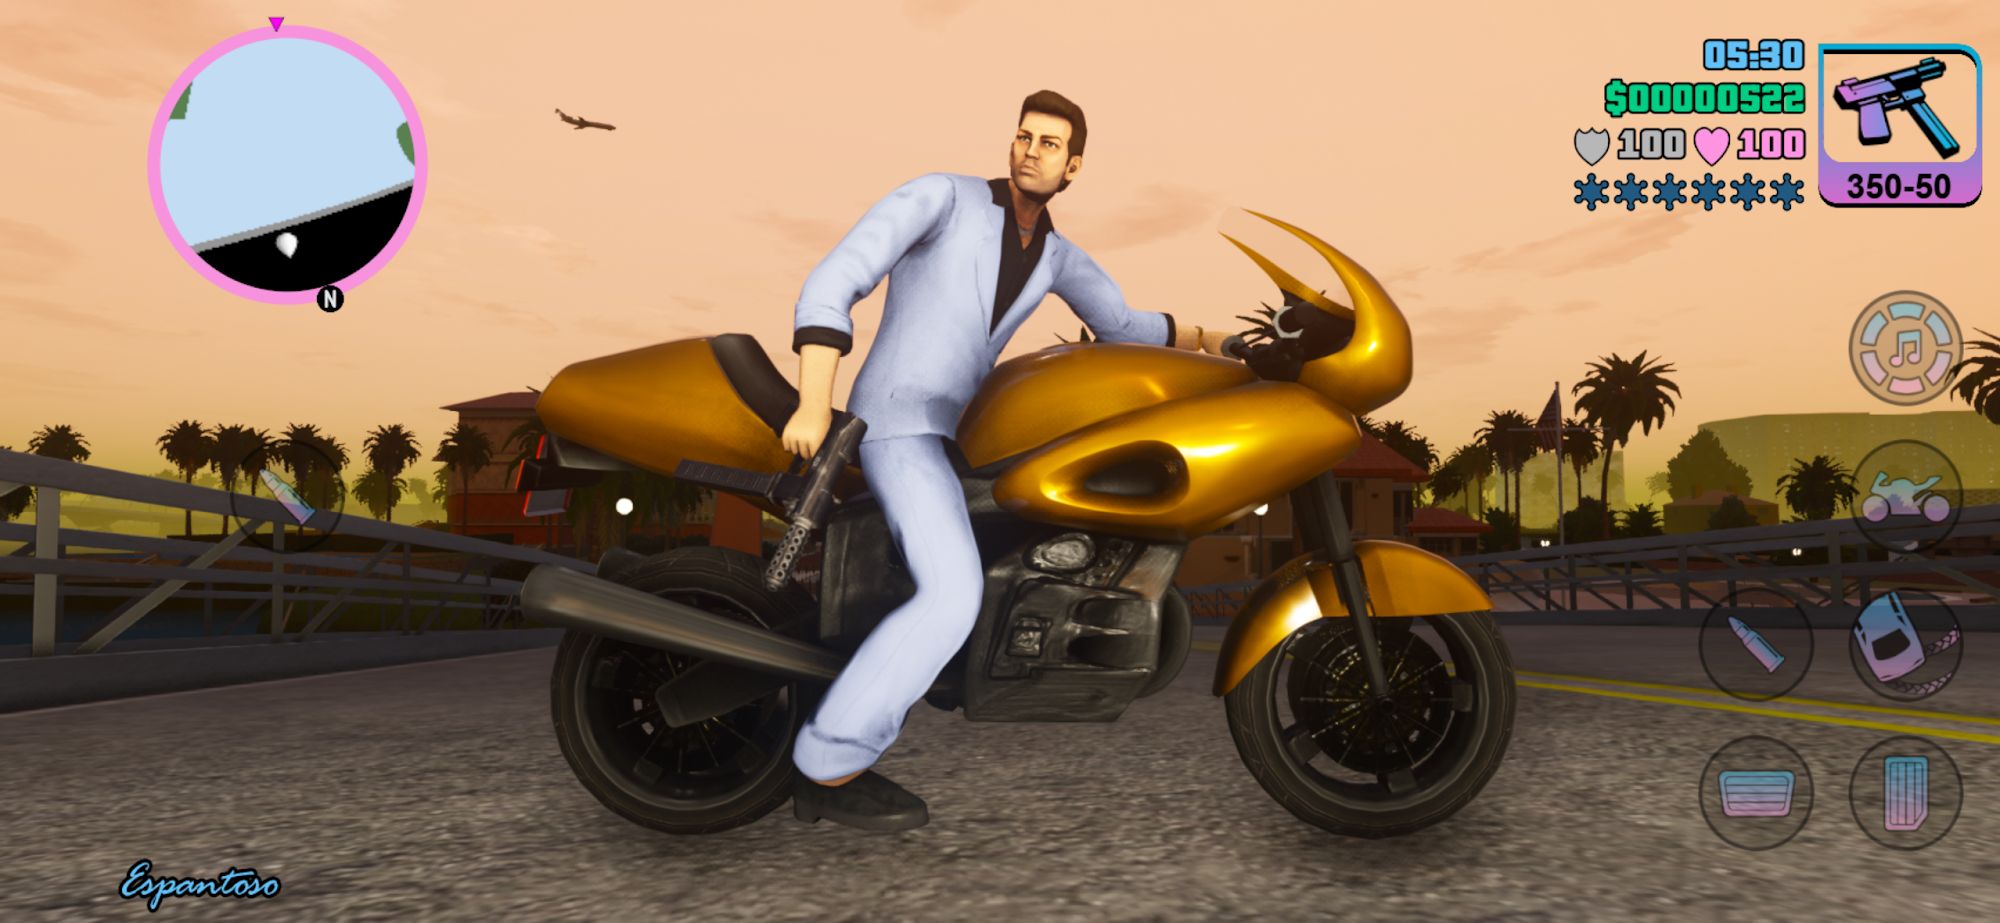 Full version of Android apk app GTA: Vice City - Definitive for tablet and phone.